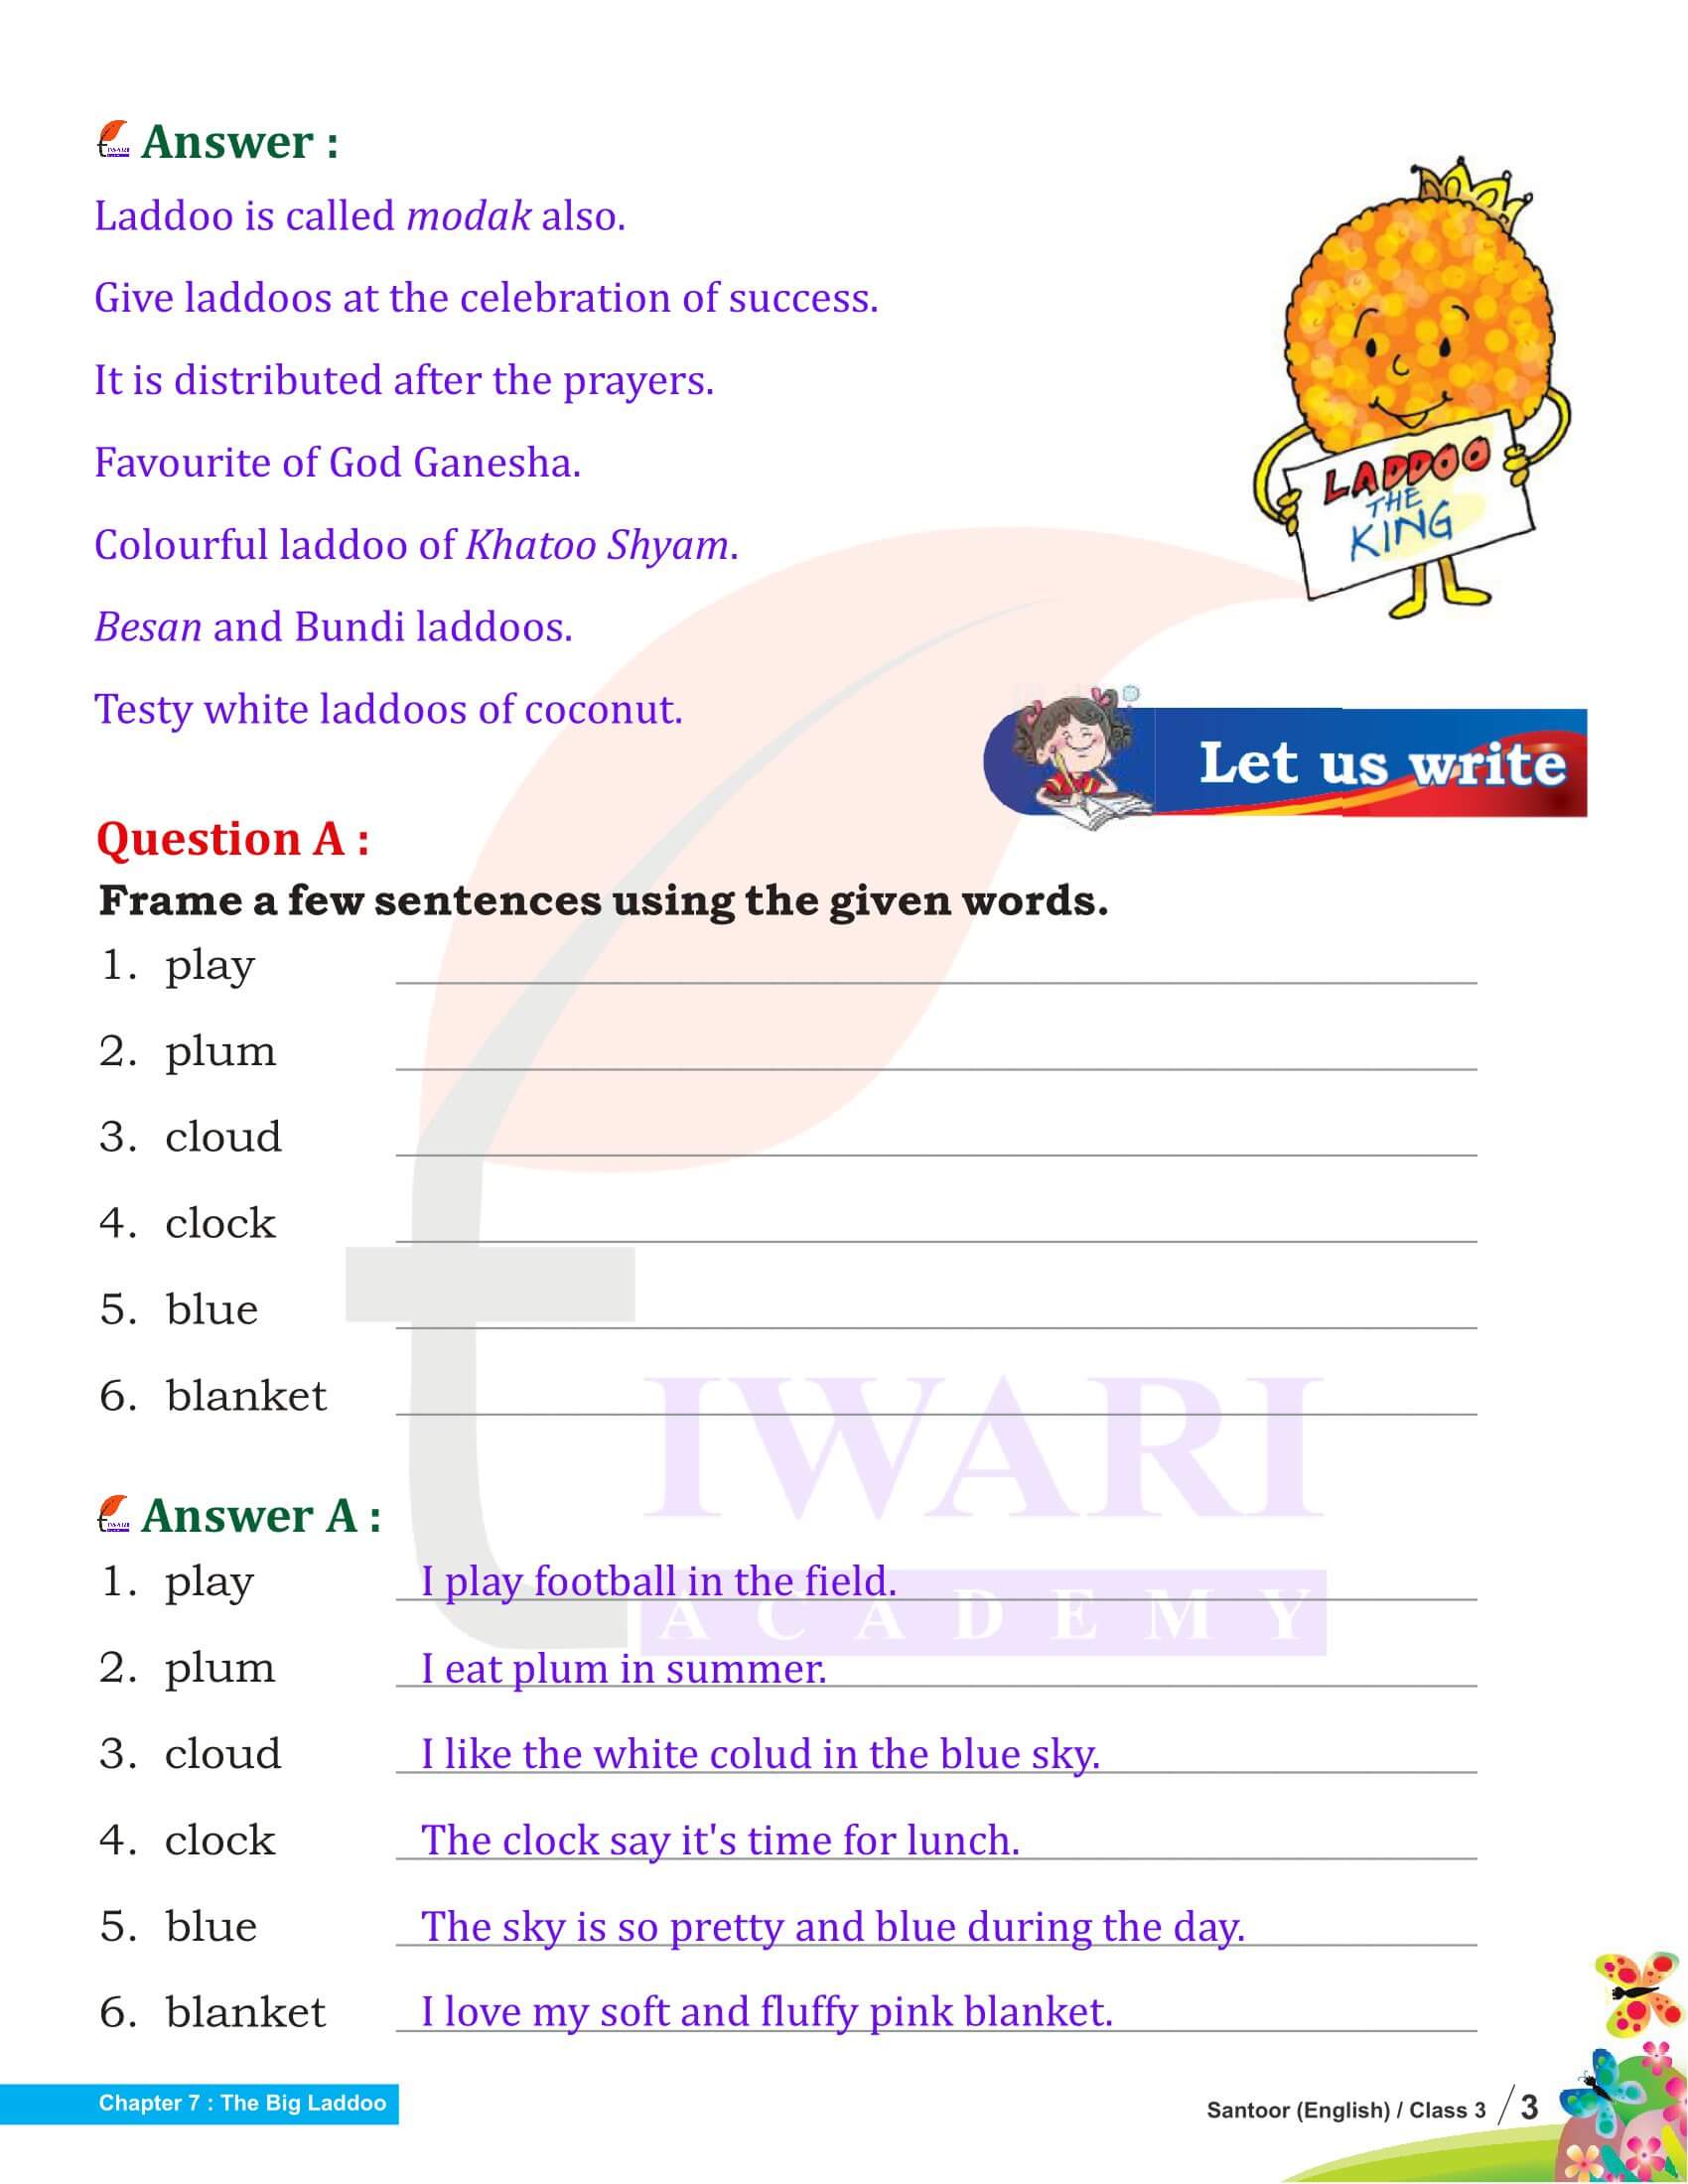 Class 3 English Santoor Chapter 7 Solutions